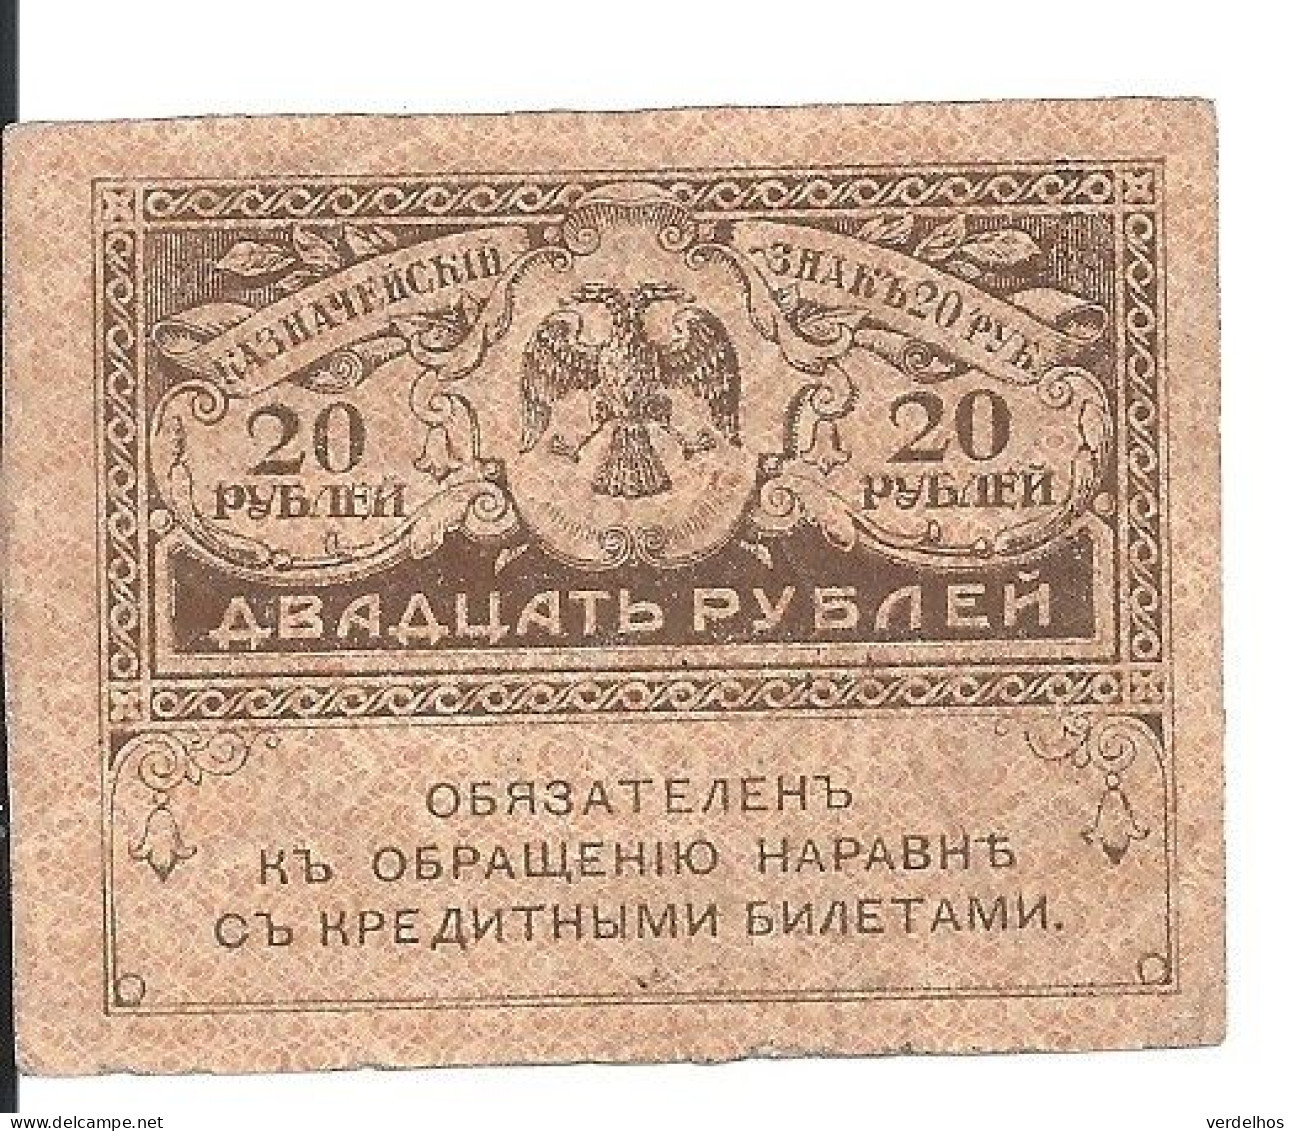 RUSSIE 20 ROUBLES 1917 XF+ P 38 - Russia